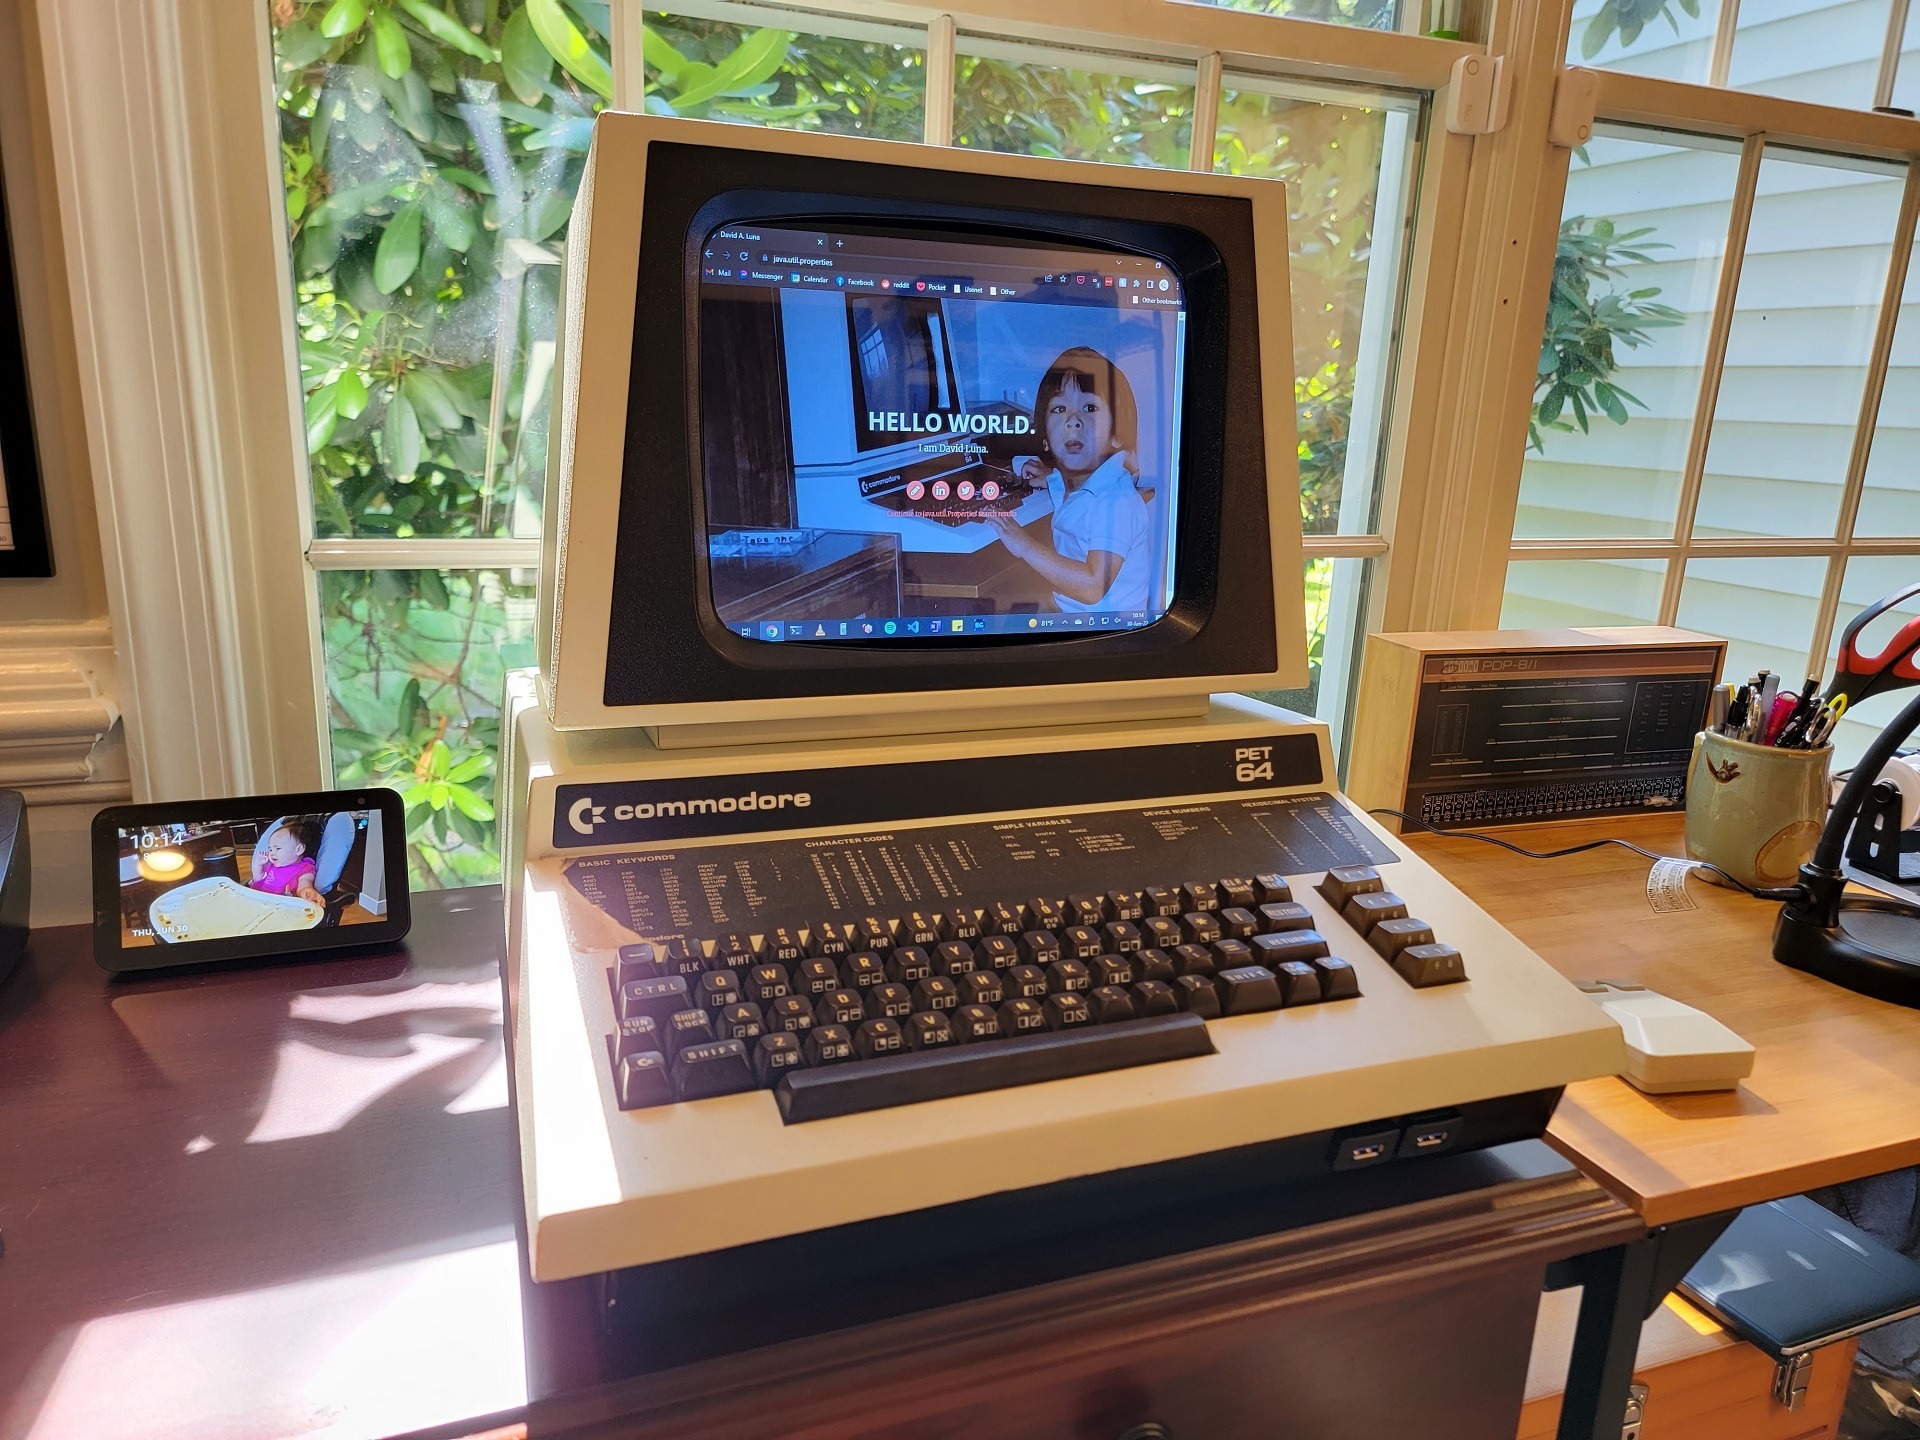 Converting a Commodore PET into a USB docking station